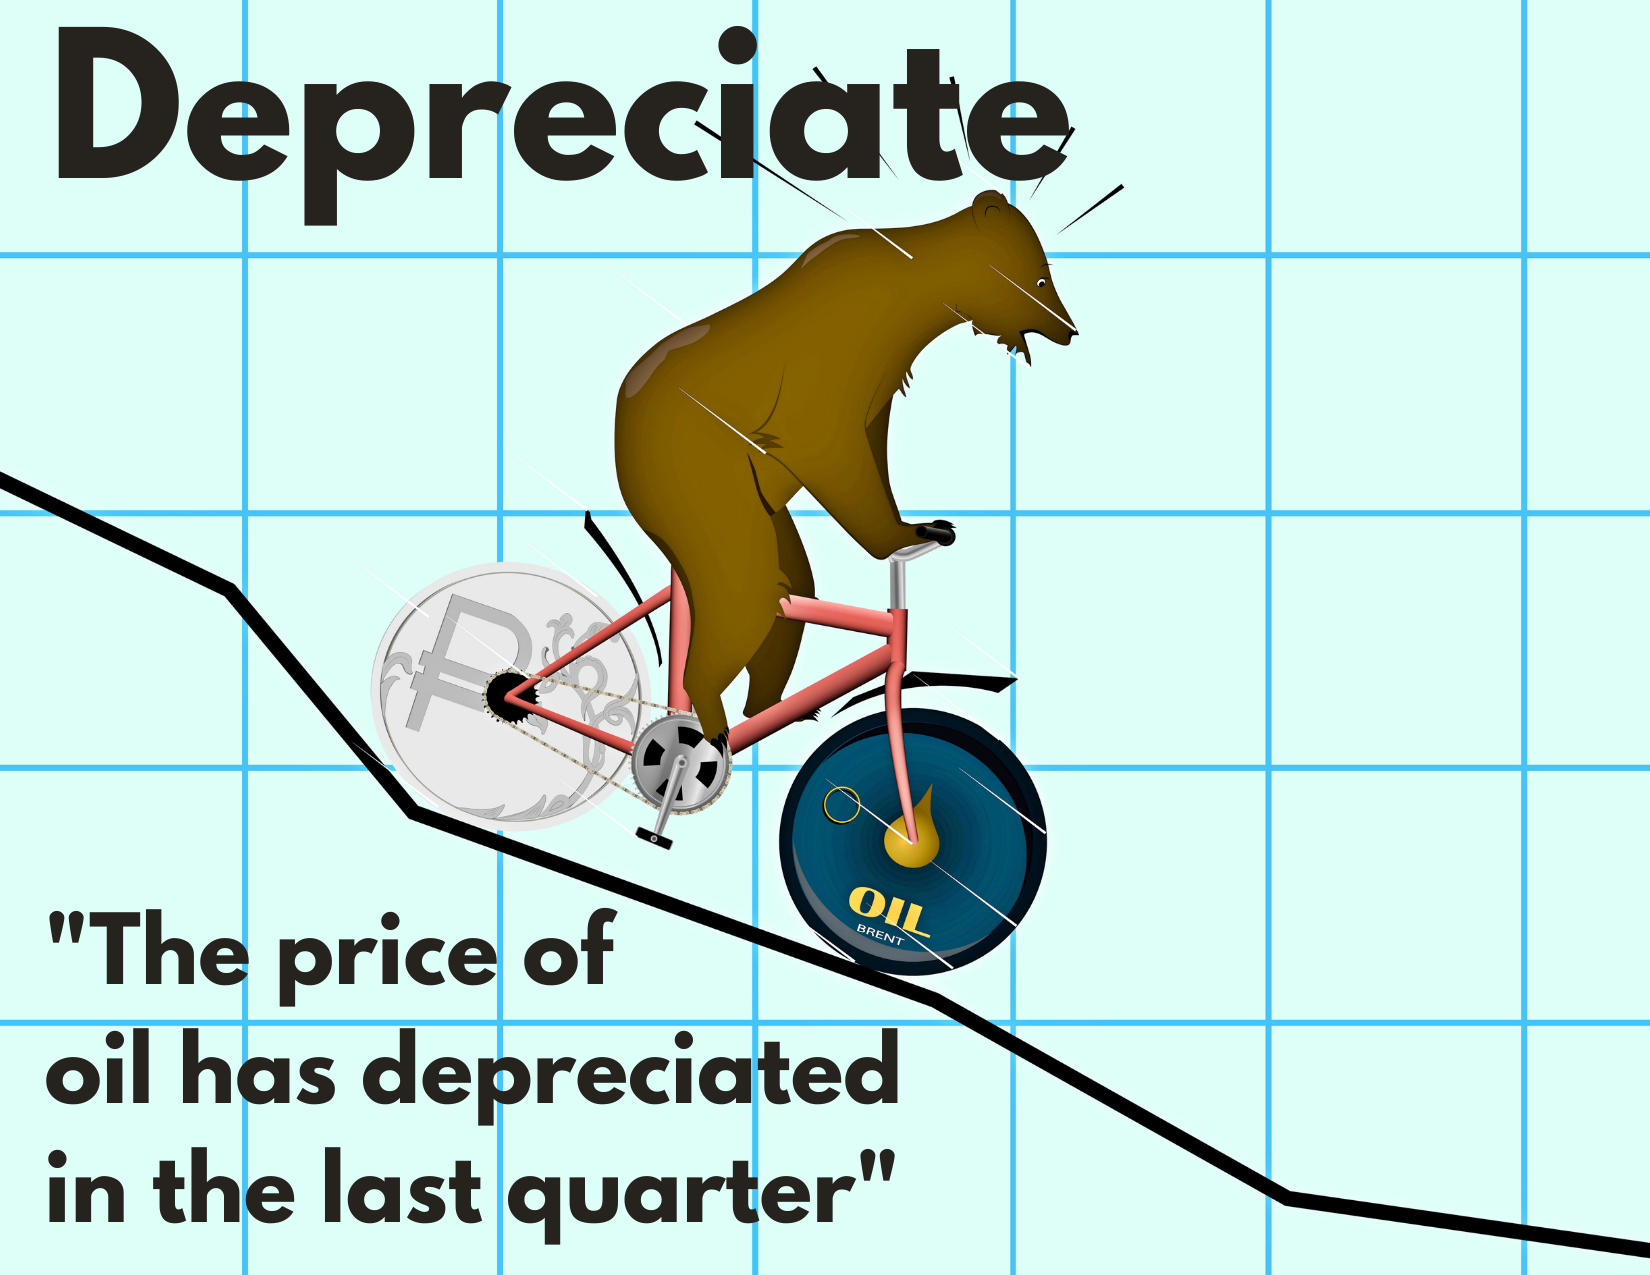 A graphic showing a bear riding a bicycle down a graph curve with the oil sign on his wheels, representing the depreciating value of oil. The caption reads "Depreciate" "The price of oil has depreciated in the last quarter"